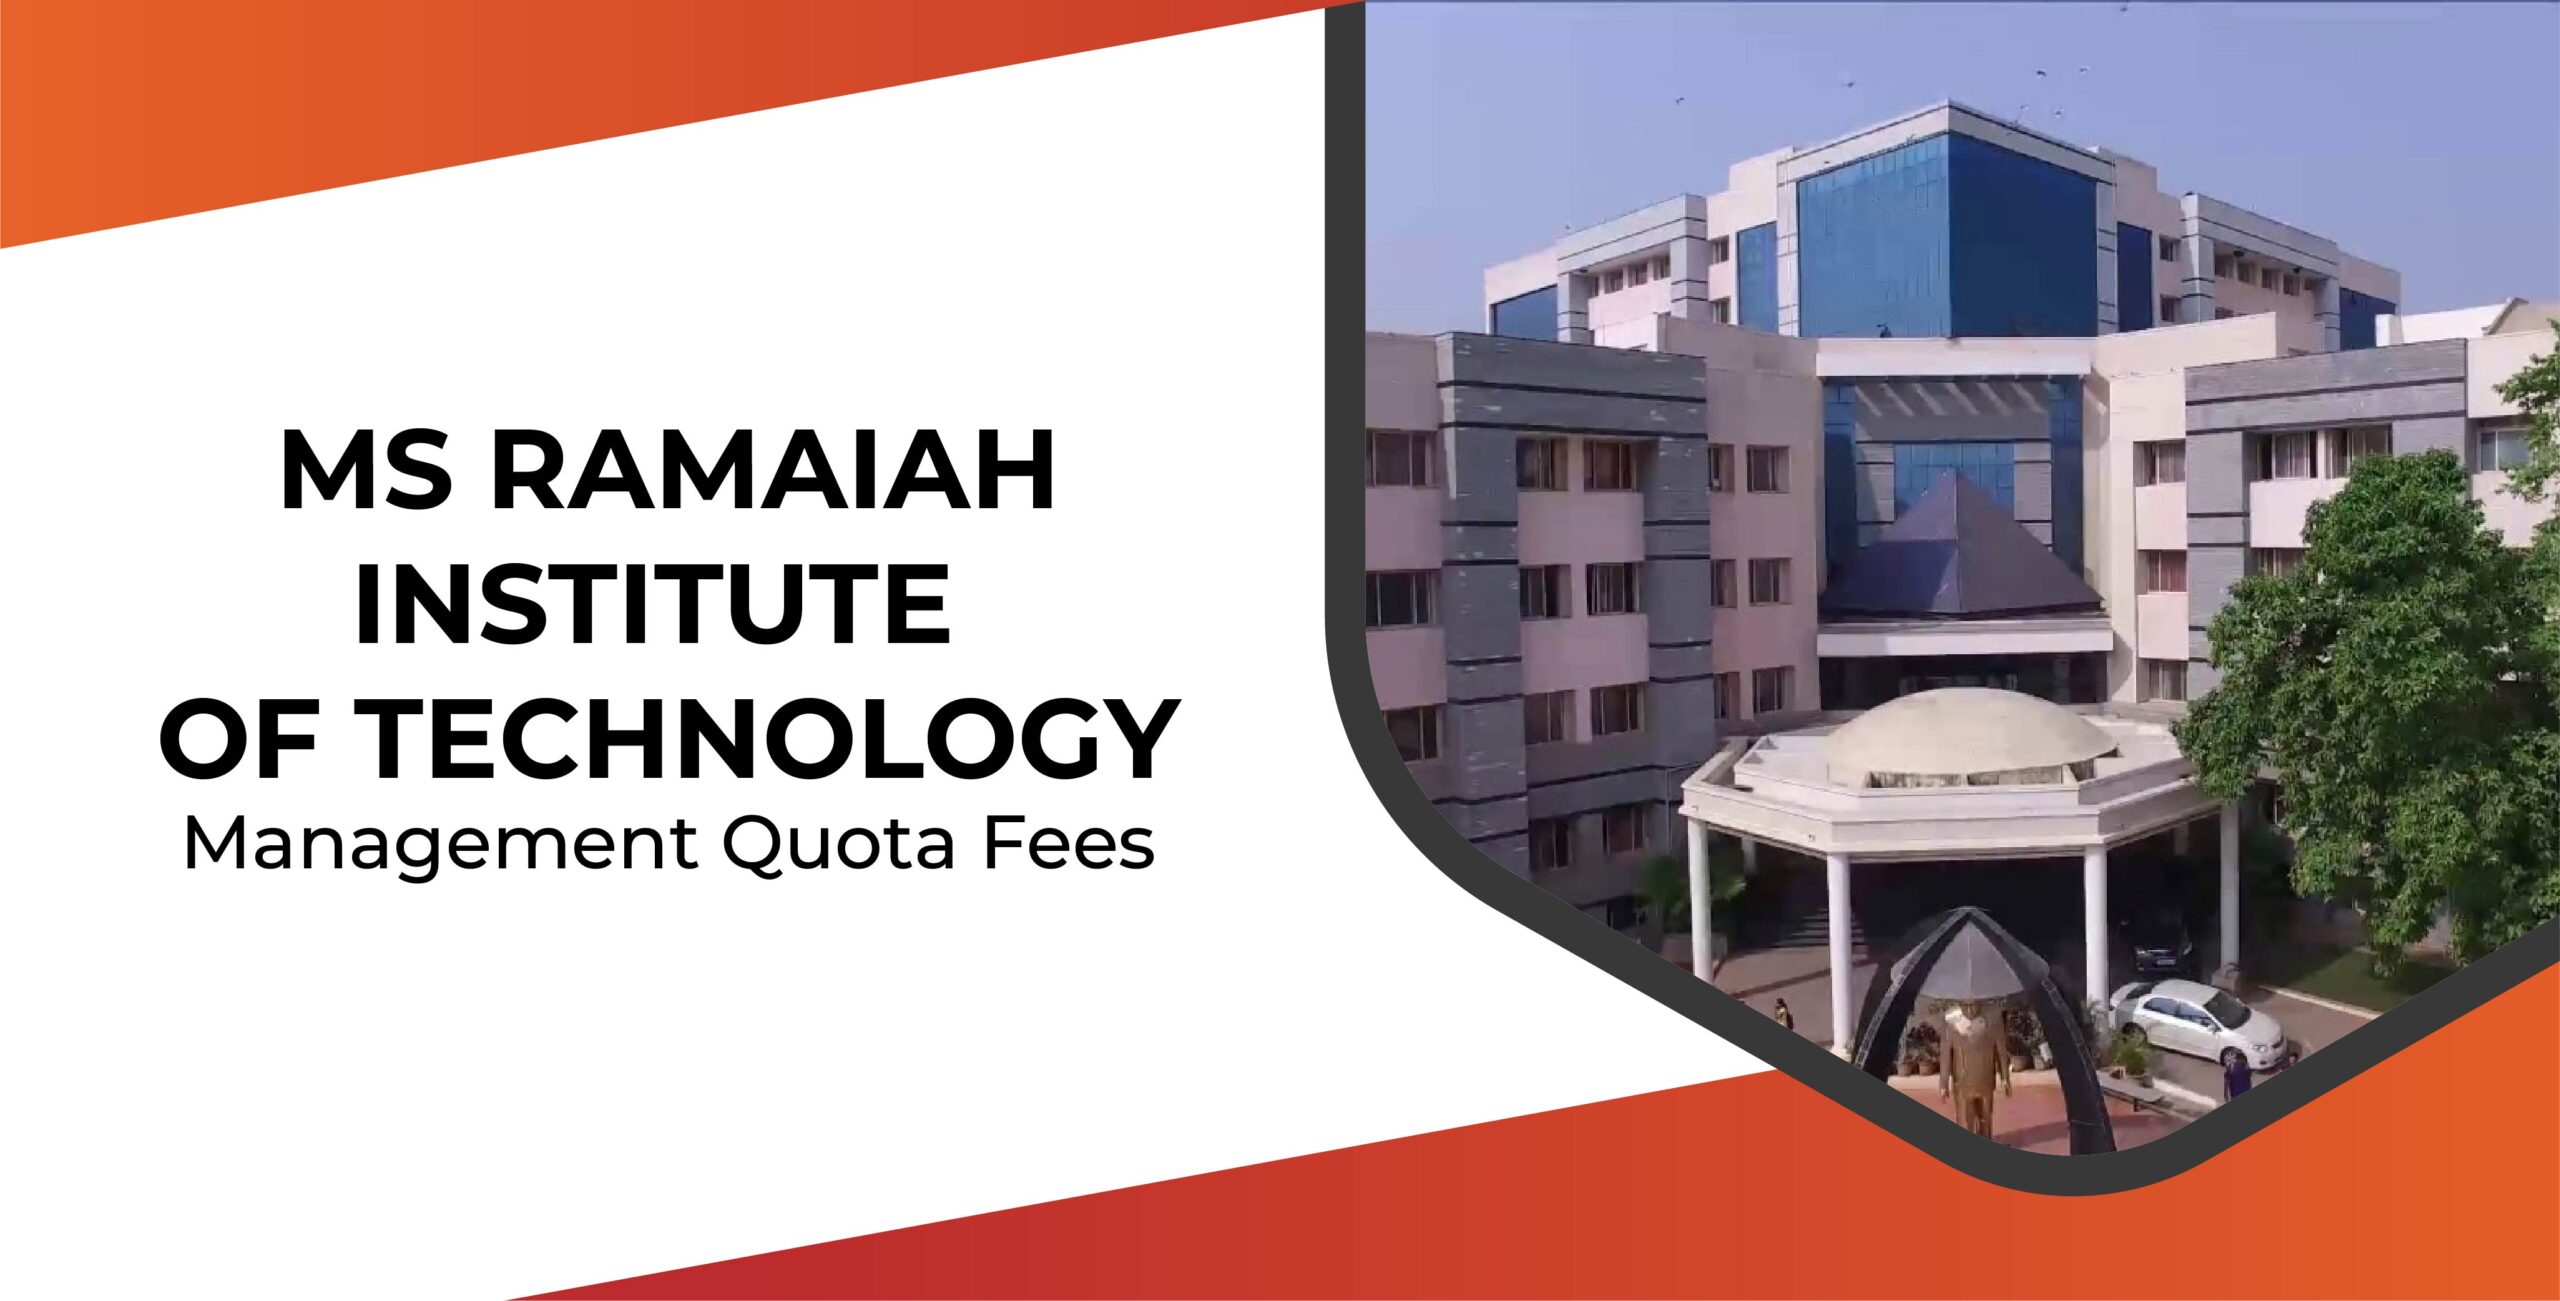 MS Ramaiah Institute of Technology Management Quota Fees